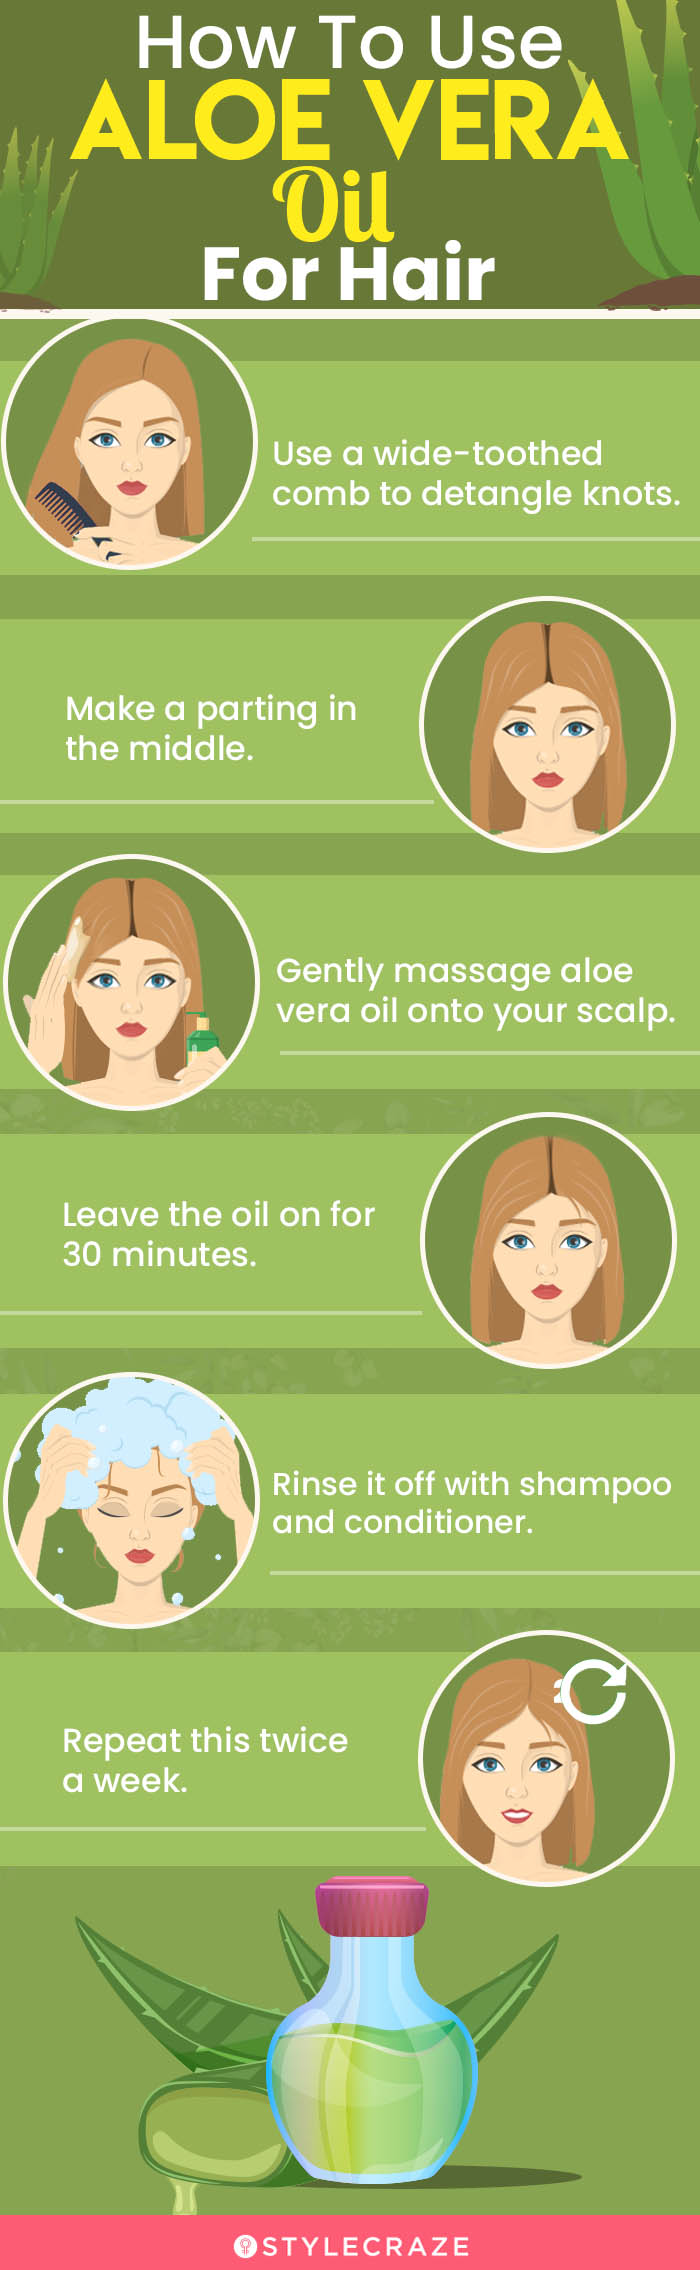 How To Use Aloe Vera For Hair Growth & Other Scalp Benefits – Vedix